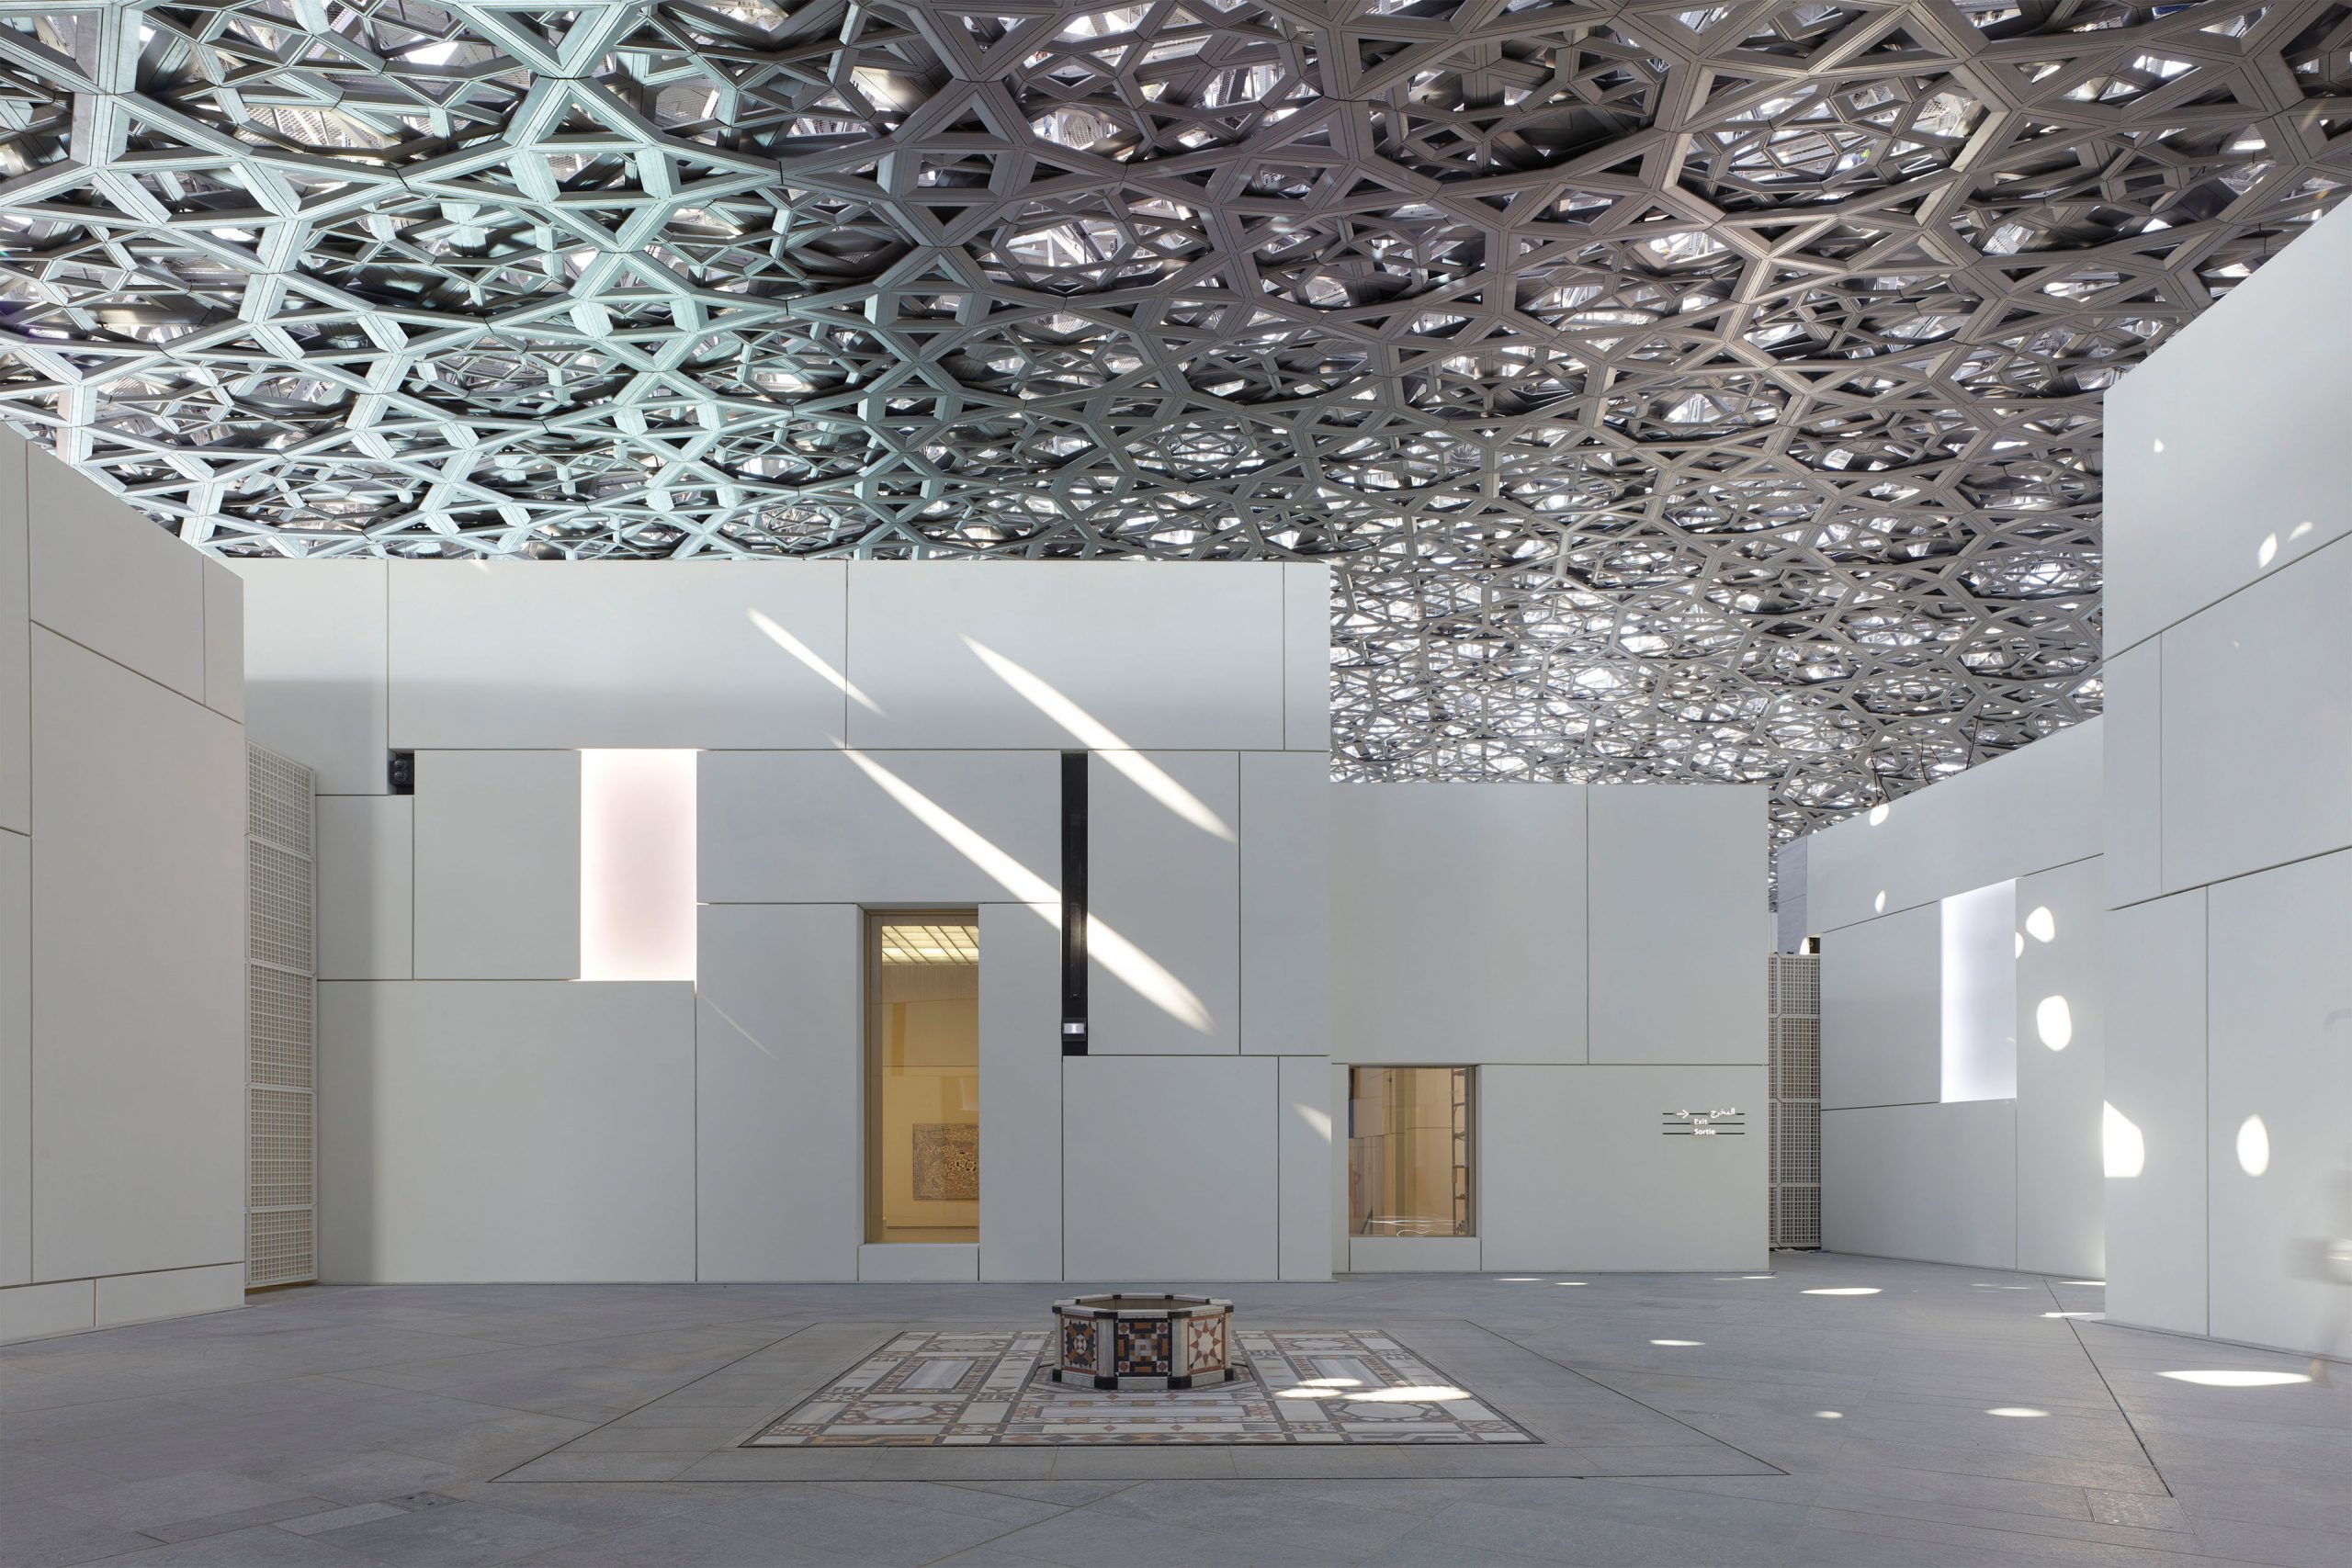 Physiognomy, Land and Territory: An audio-visual experience at Louvre Abu Dhabi